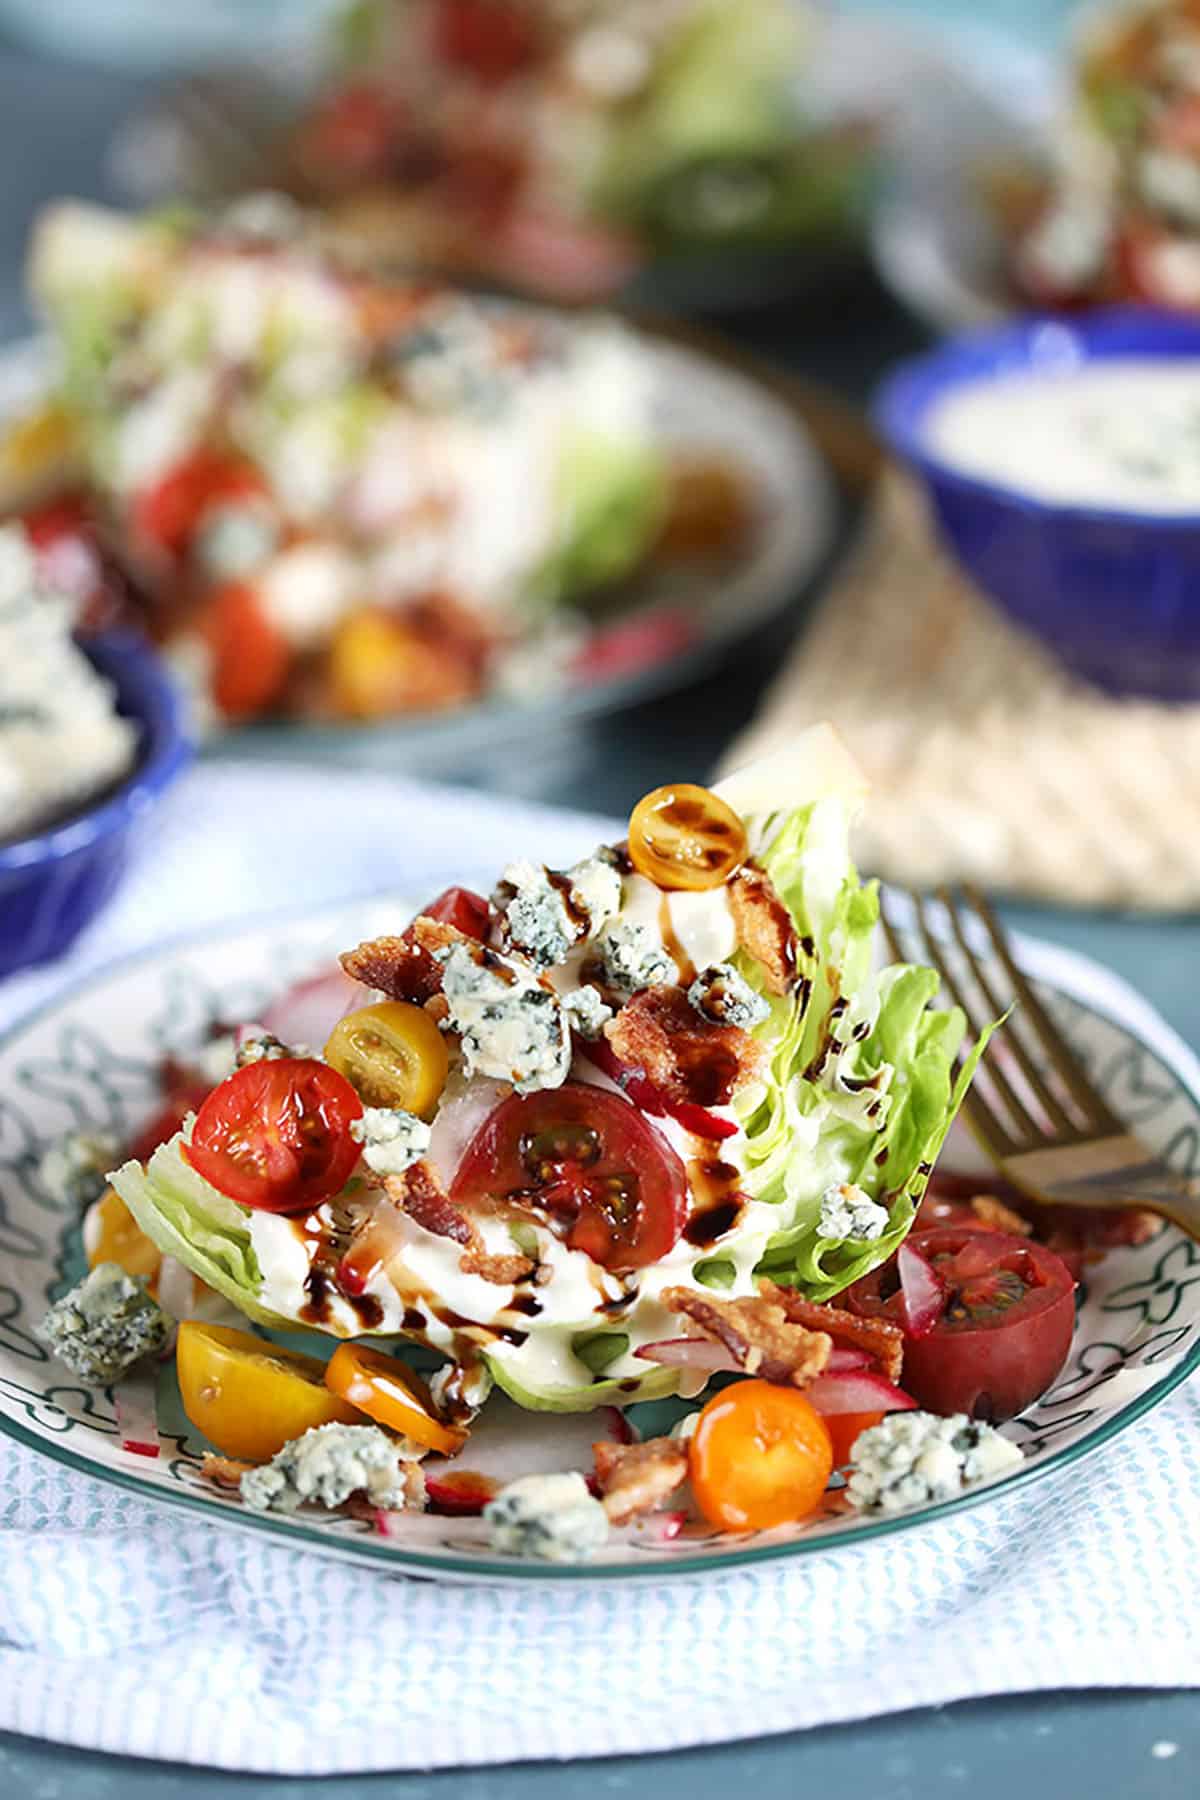 Iceberg Wedge Salad on a white plate with tomatoes, blue cheese and bacon.